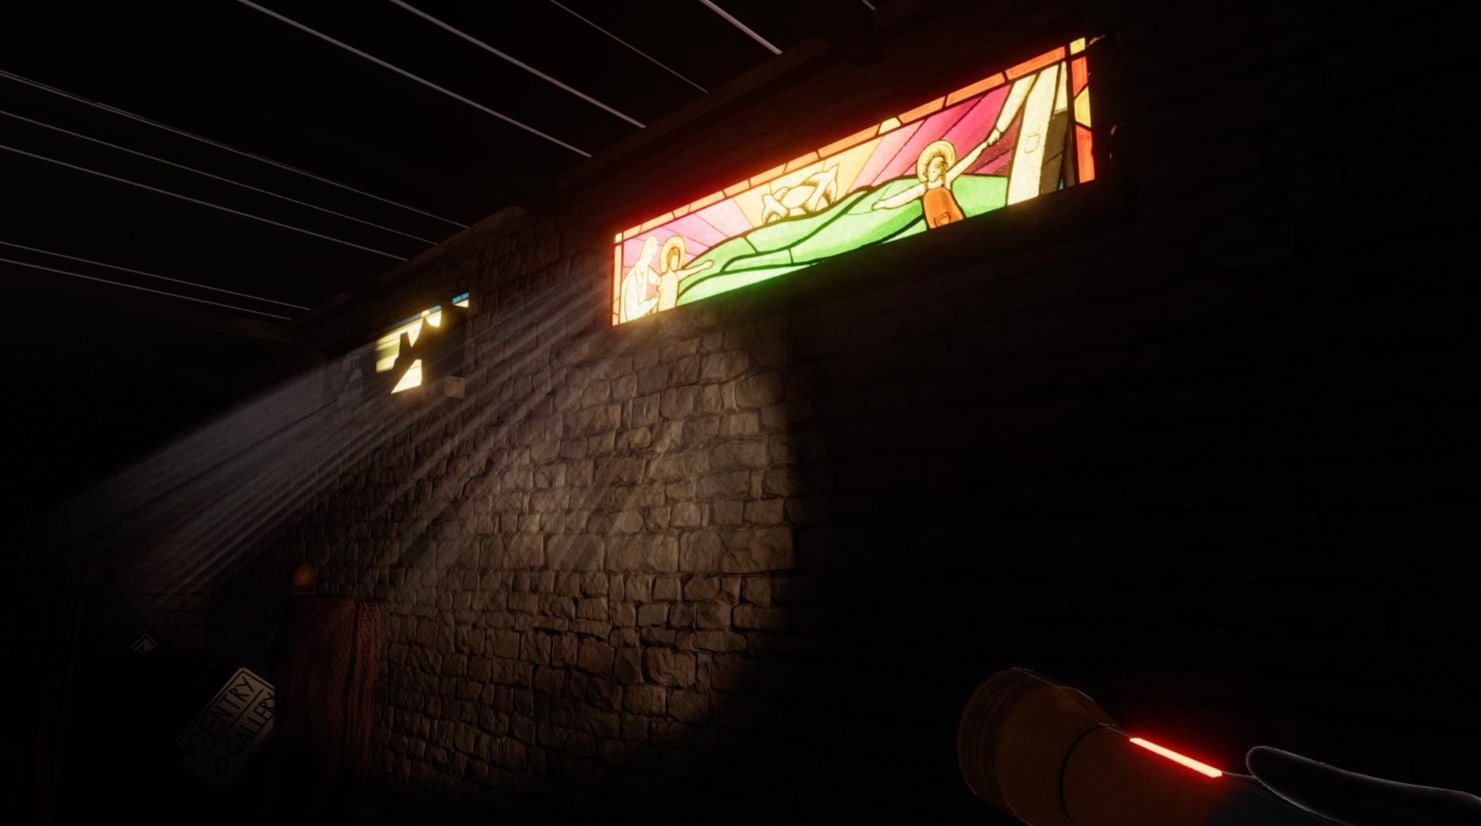  In-game screenshot focusing on a stained glass window through which beams of light stream, assumedly from a car outside. Perspective is limited by the reach of the torchlight, so little beyond the window is discernible, but the exterior light source illuminates the design of the stained glass. Pictured are two small children, one on either end of the long, landscape window. They are being kept apart, despite outstretched arms, by two adult figures in white medical coats. Between them is a grassy, hilly area. Sun beams stream down onto the two adult figures. 